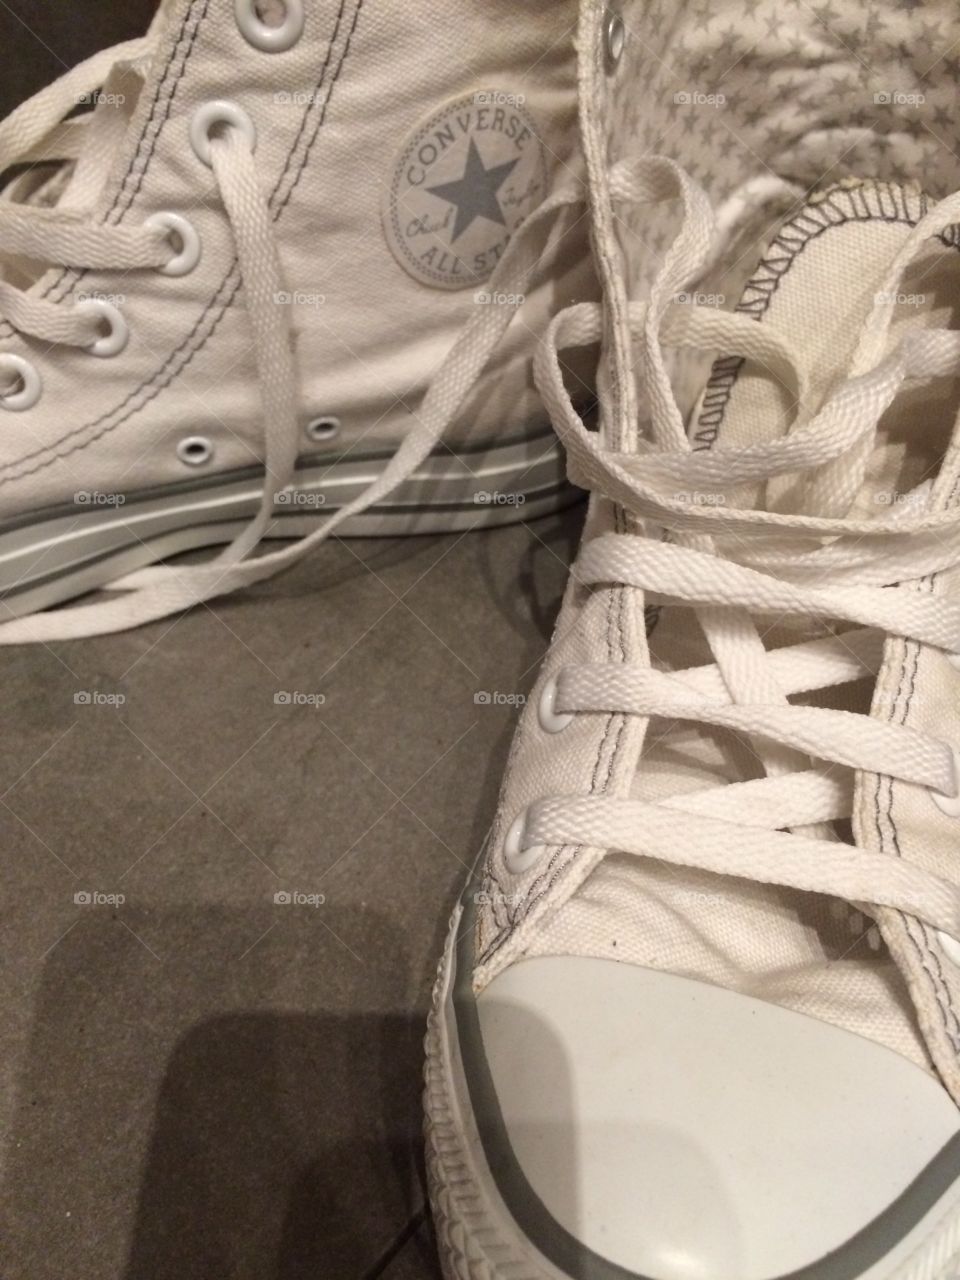 Pair of shoes on the floor. Pair of converse 